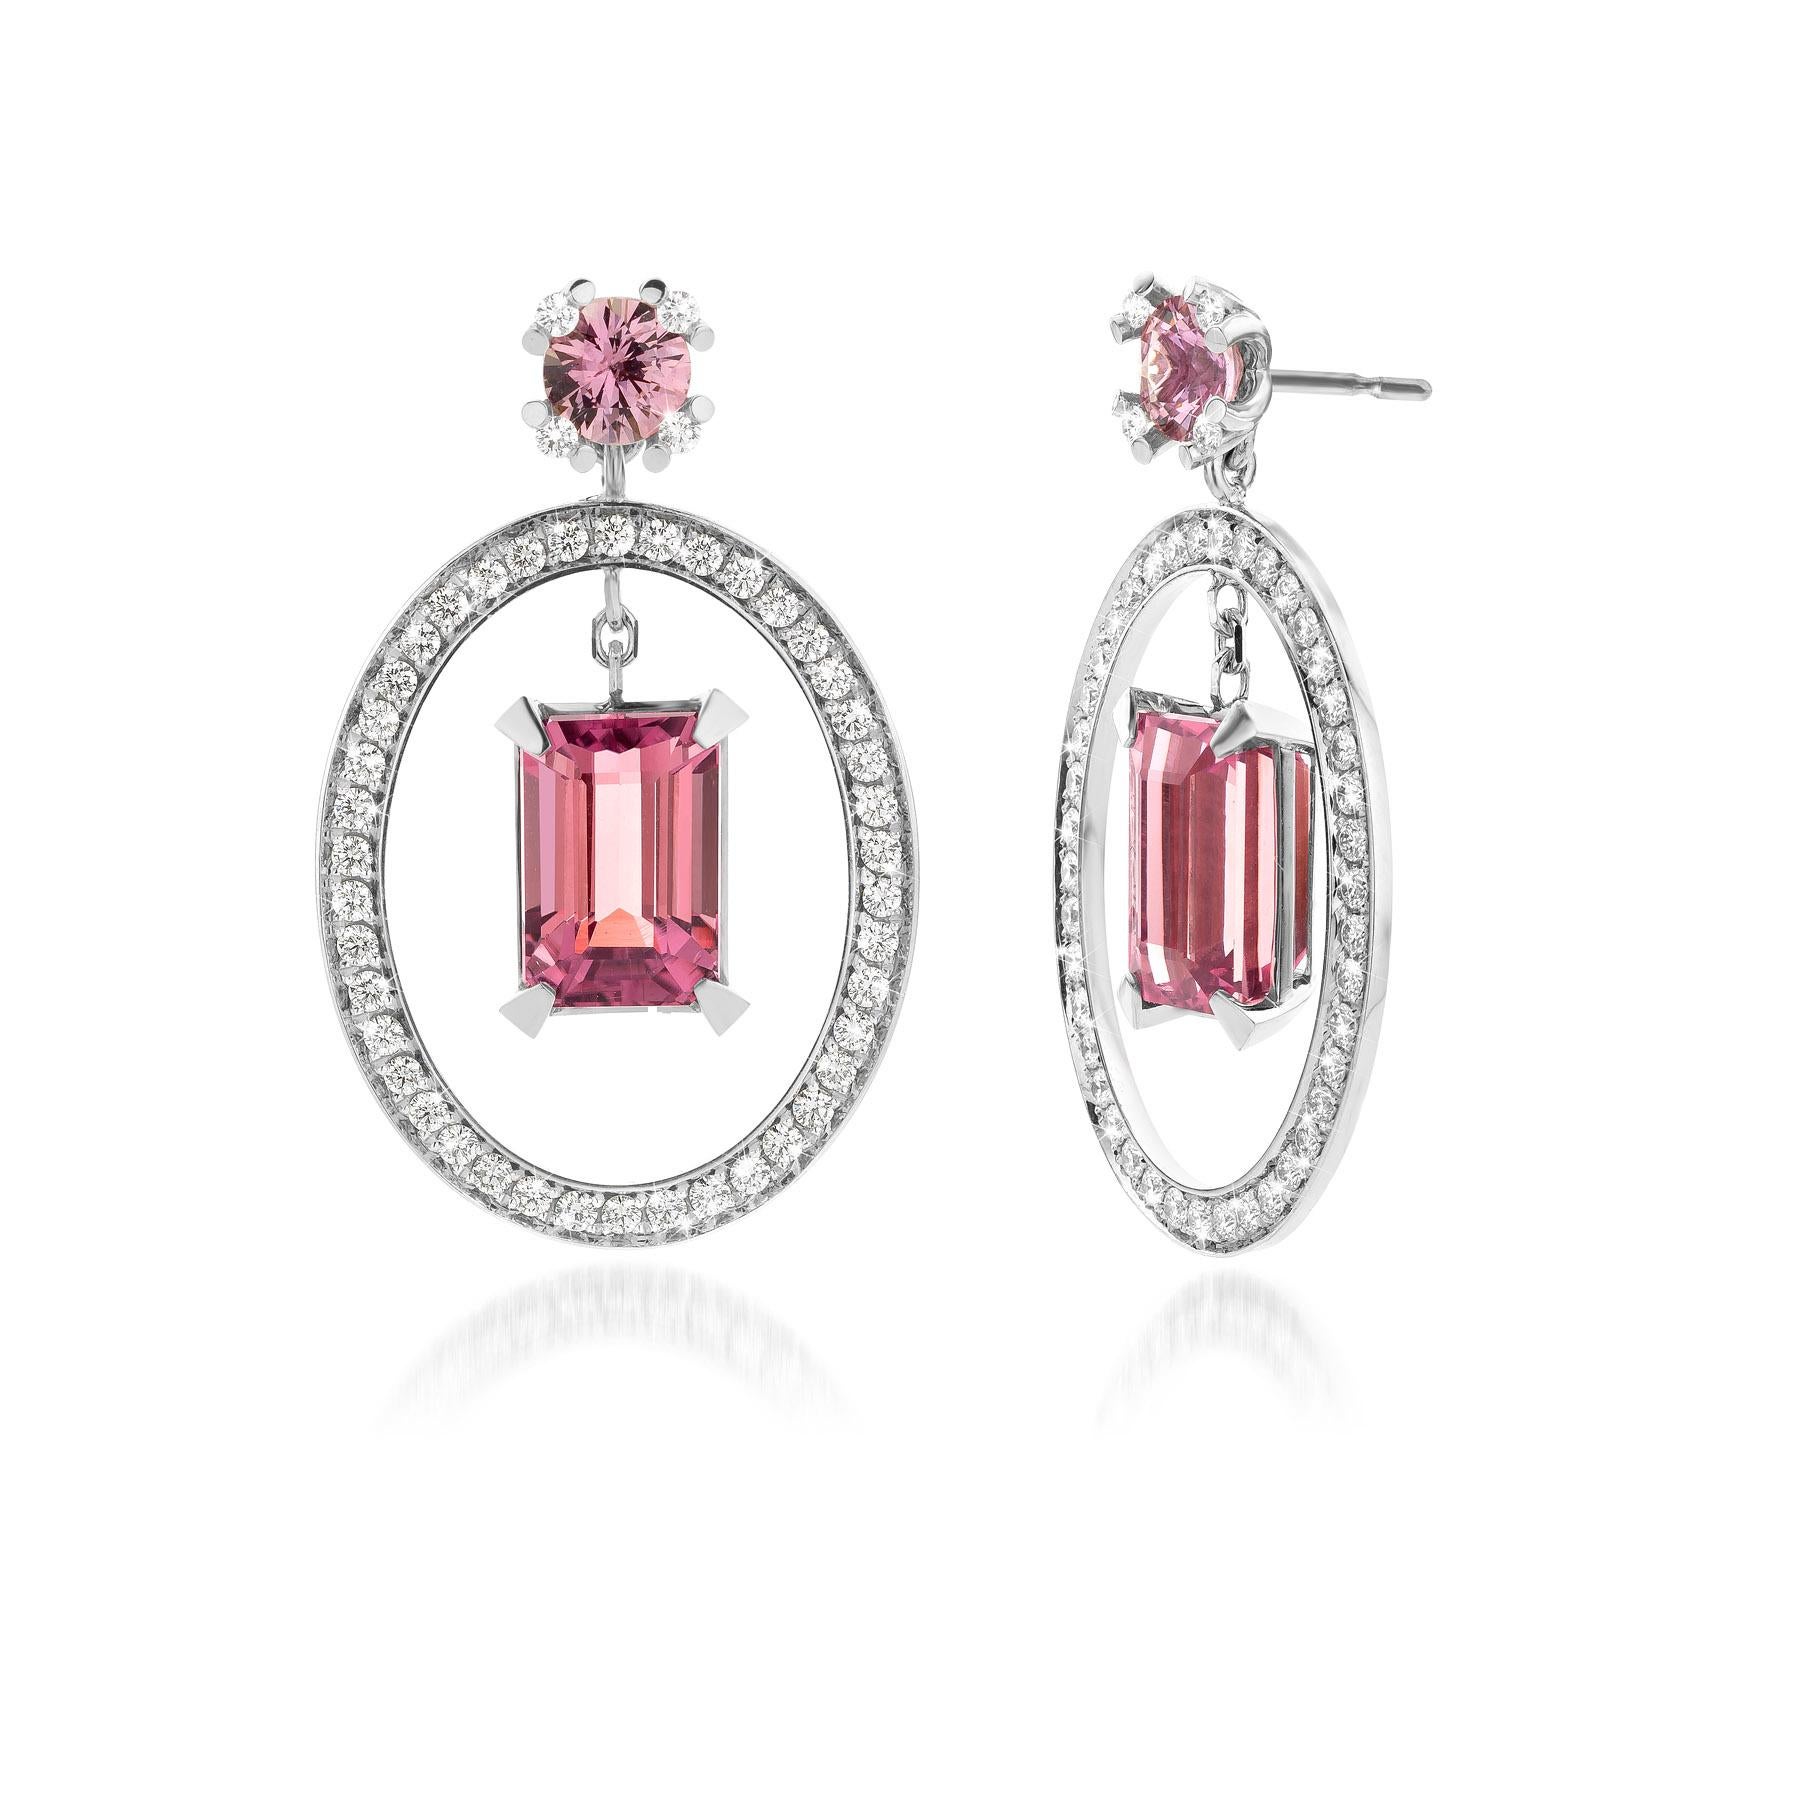 Contemporary Cober “Tourmalines” with 4.14 Carat Tourmalines, Diamonds and Sapphires Earrings For Sale